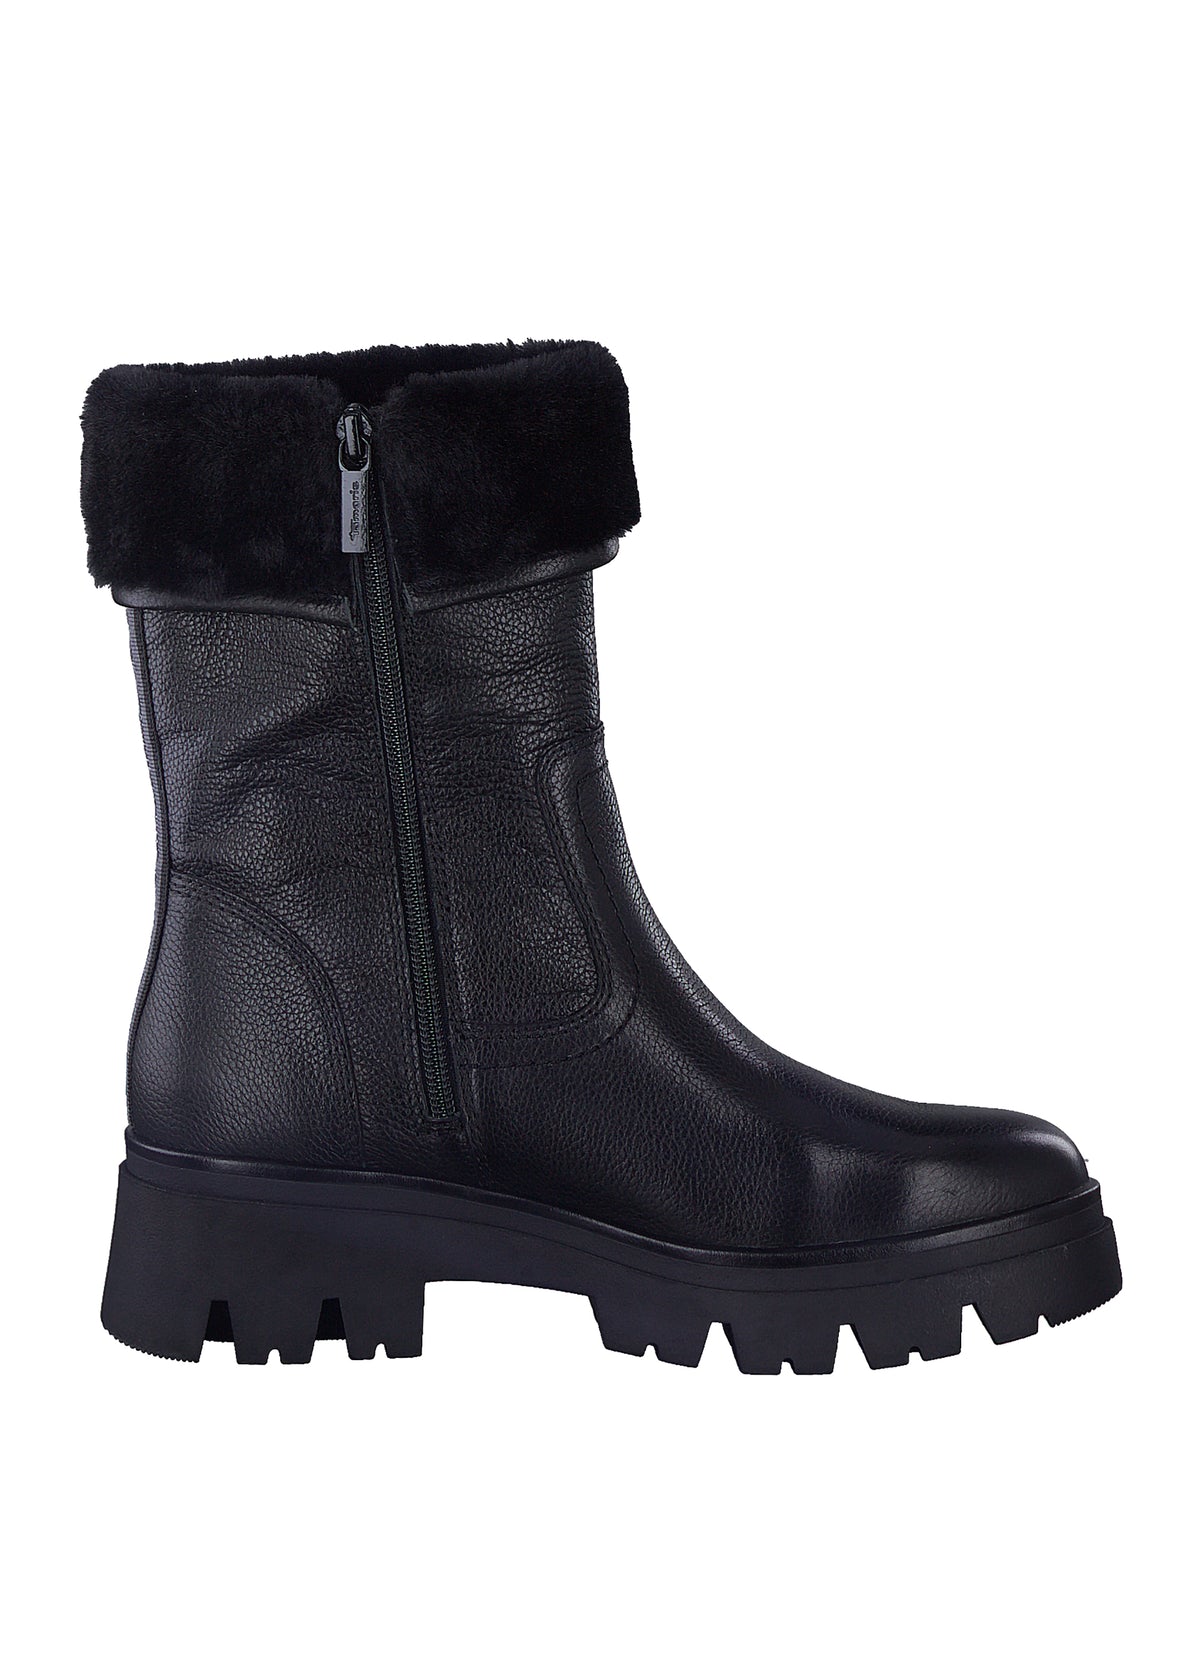 Winter ankle boots with a thick sole - black, tex membrane